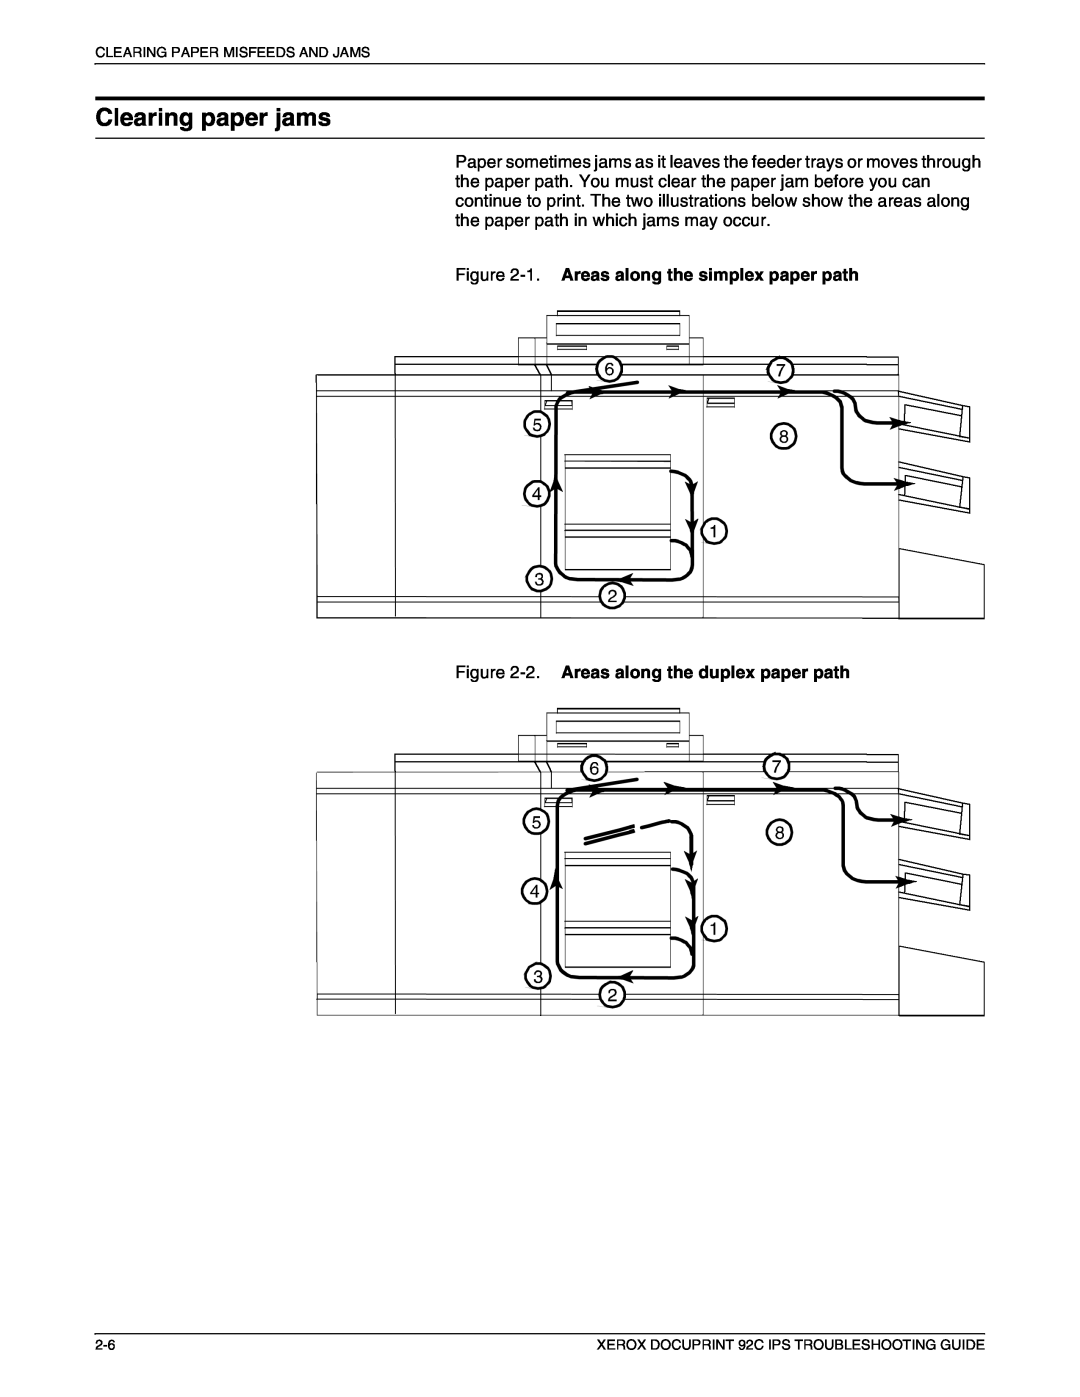 Xerox 92C IPS manual Clearing paper jams, 1. Areas along the simplex paper path, 2. Areas along the duplex paper path 